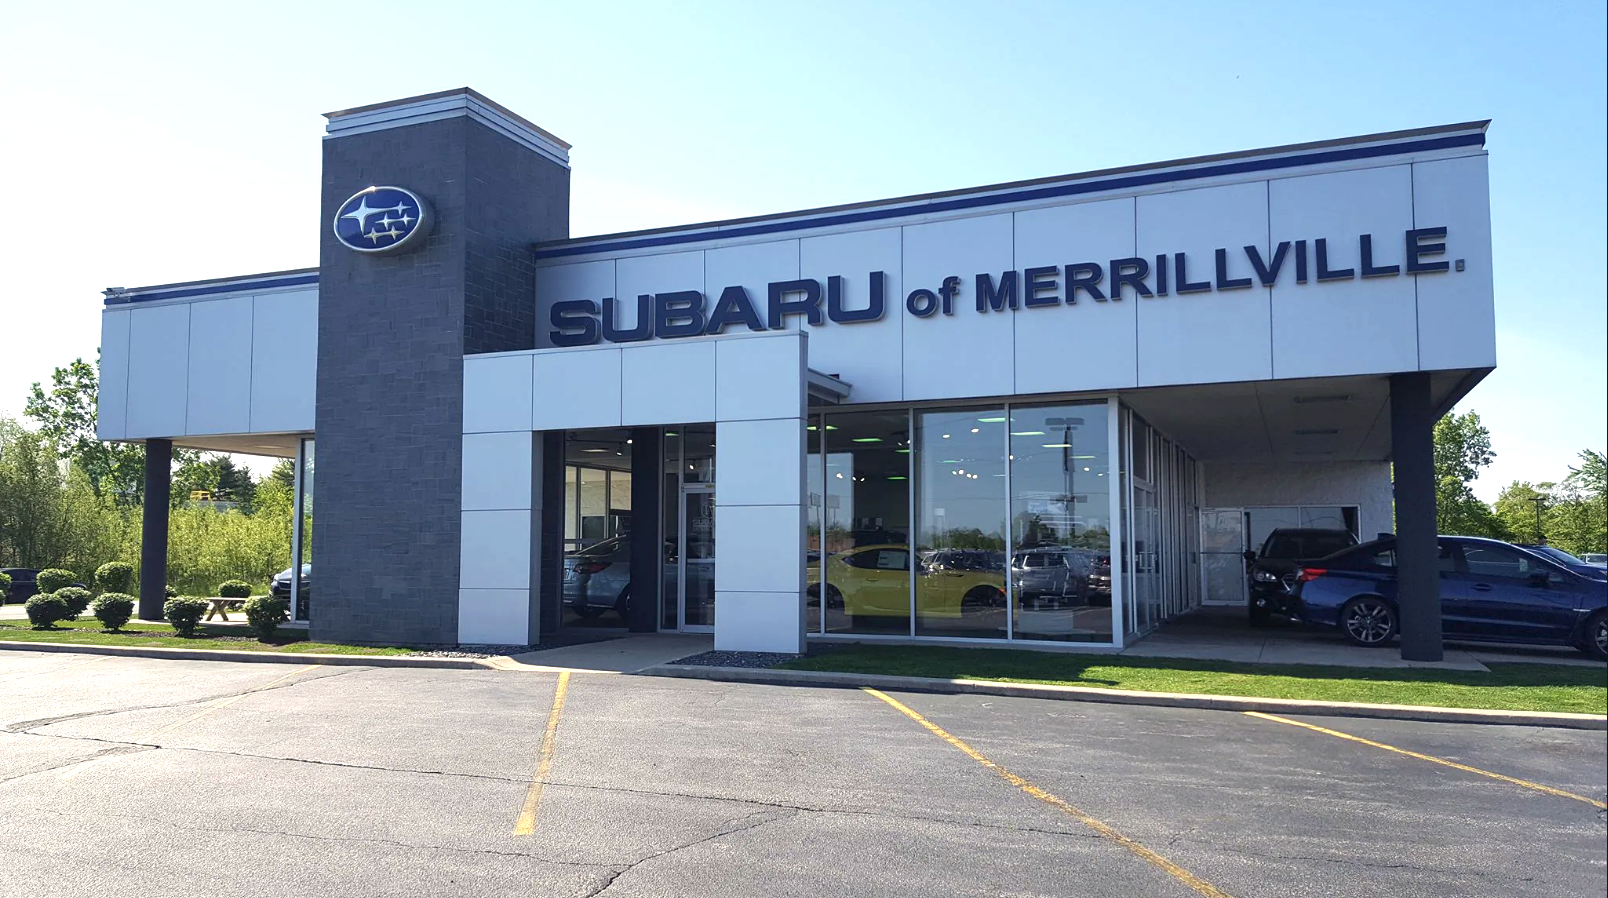 Zeigler has acquired its first Subaru dealership